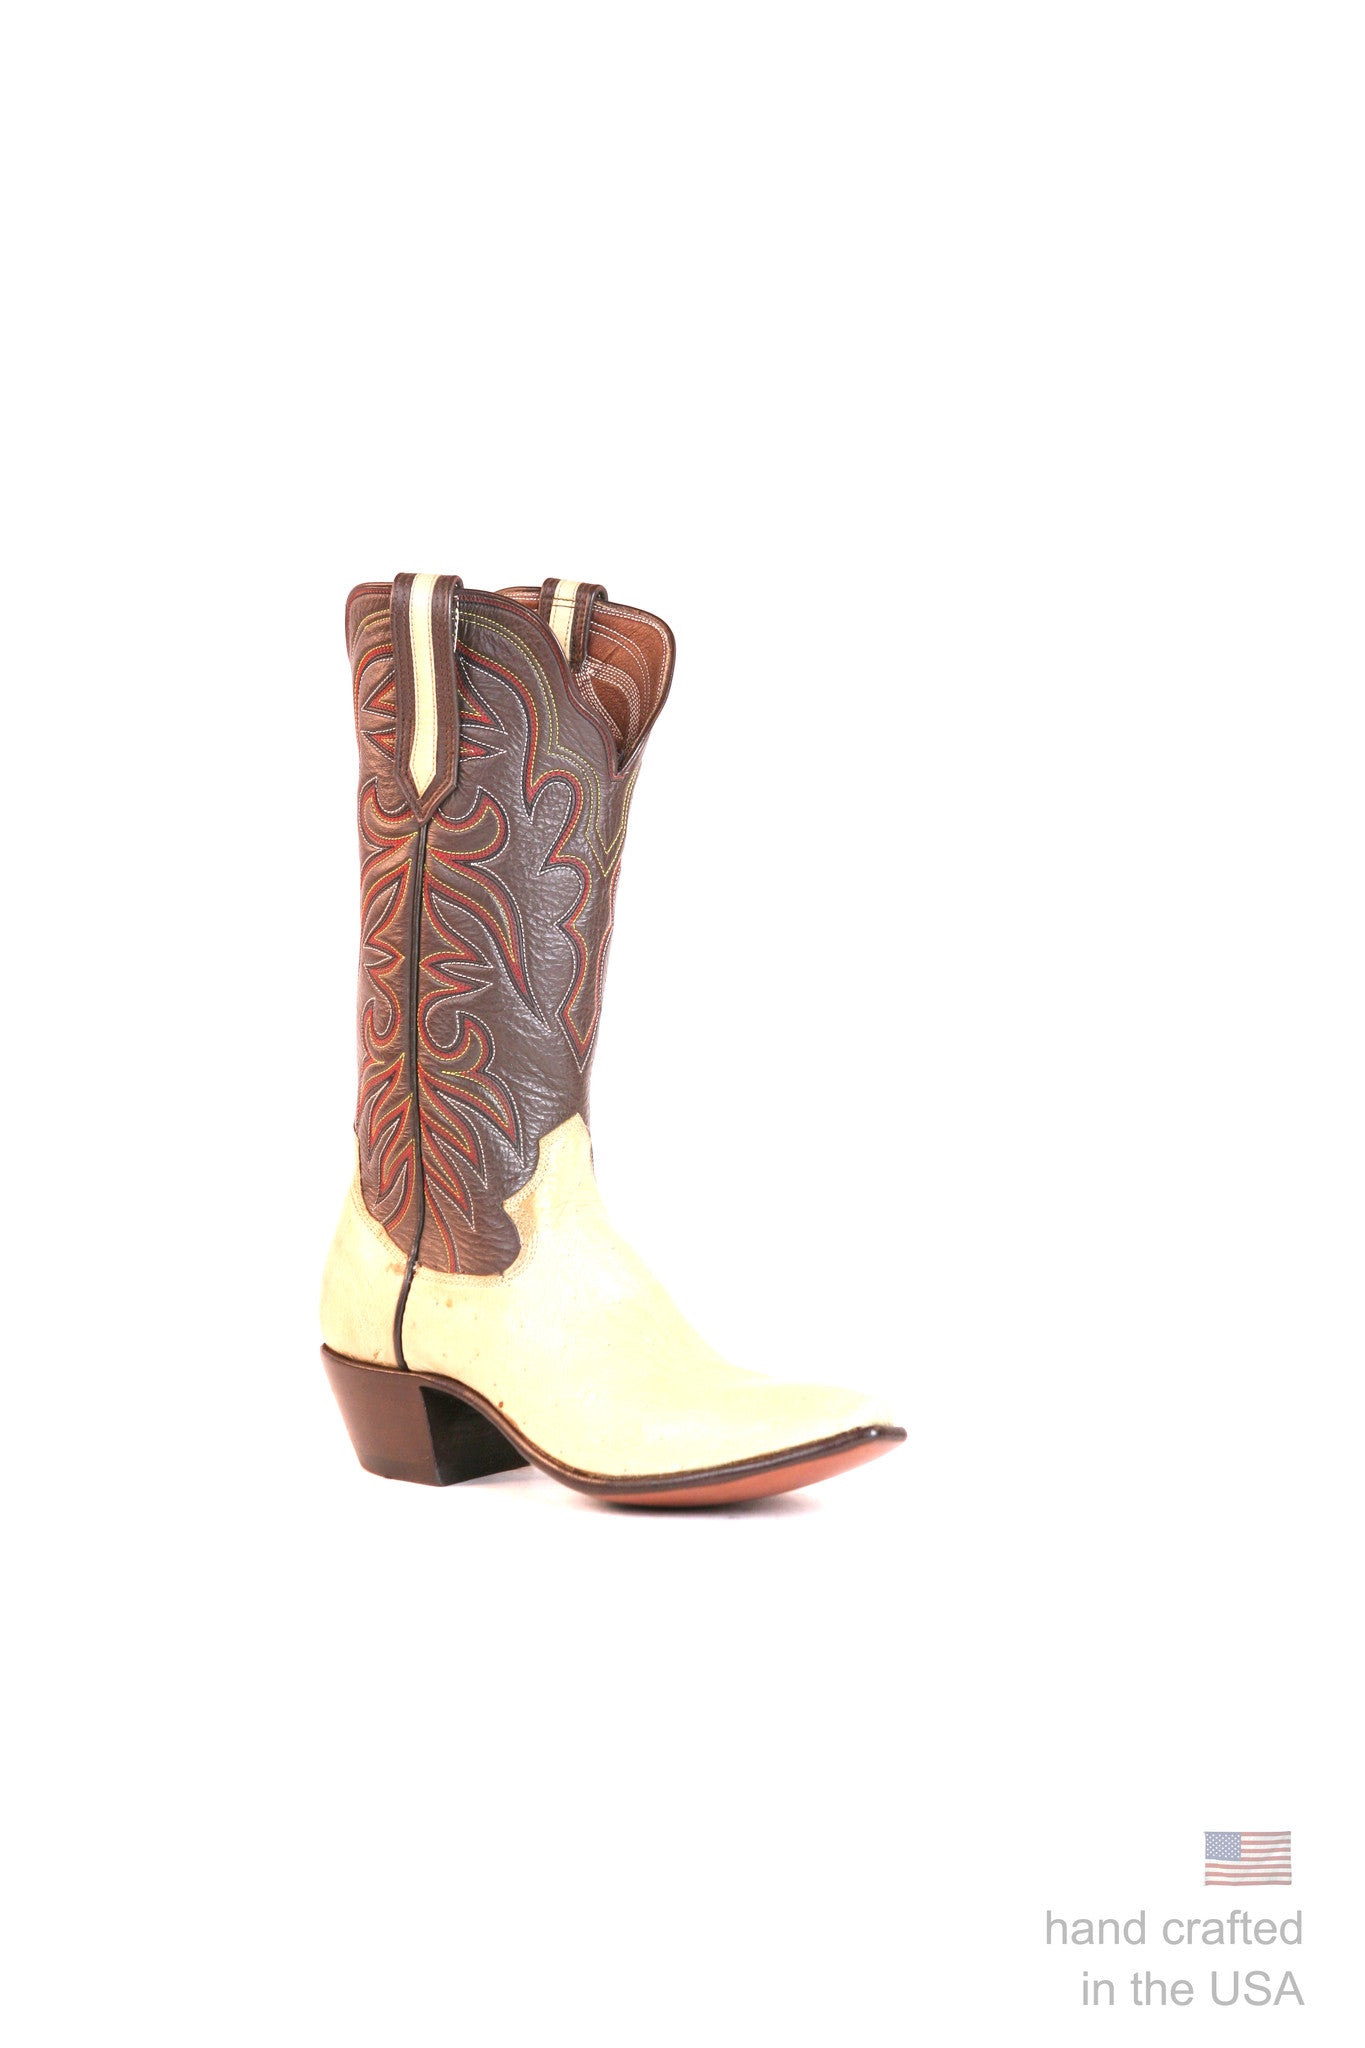 Singles: Boot 0020: Size 5A